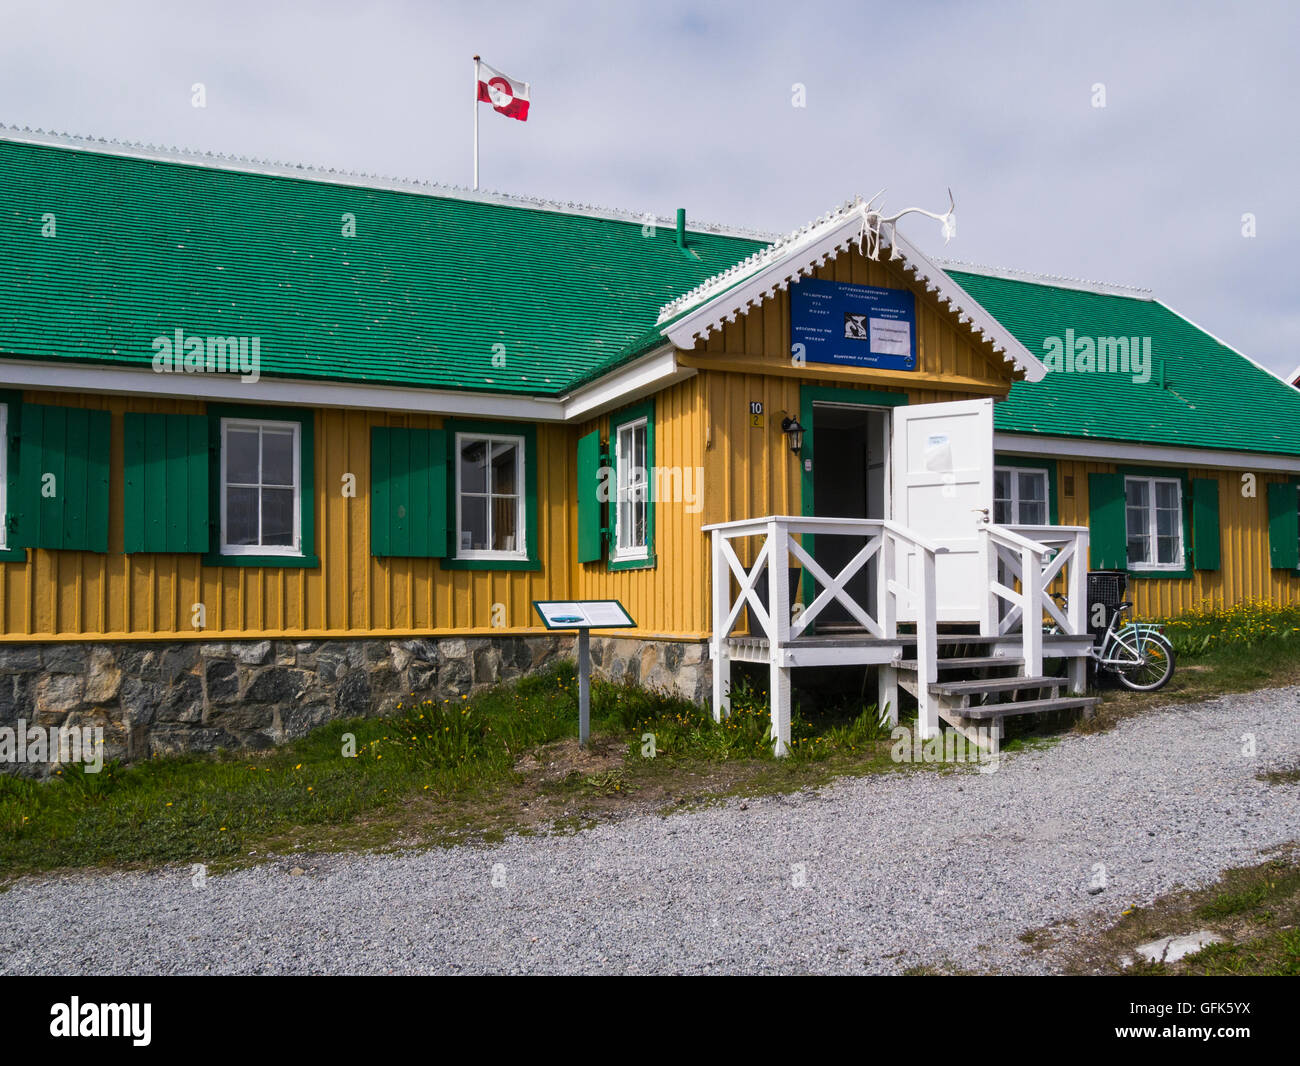 Page 3 - Labrador Sea High Resolution Stock Photography and Images - Alamy